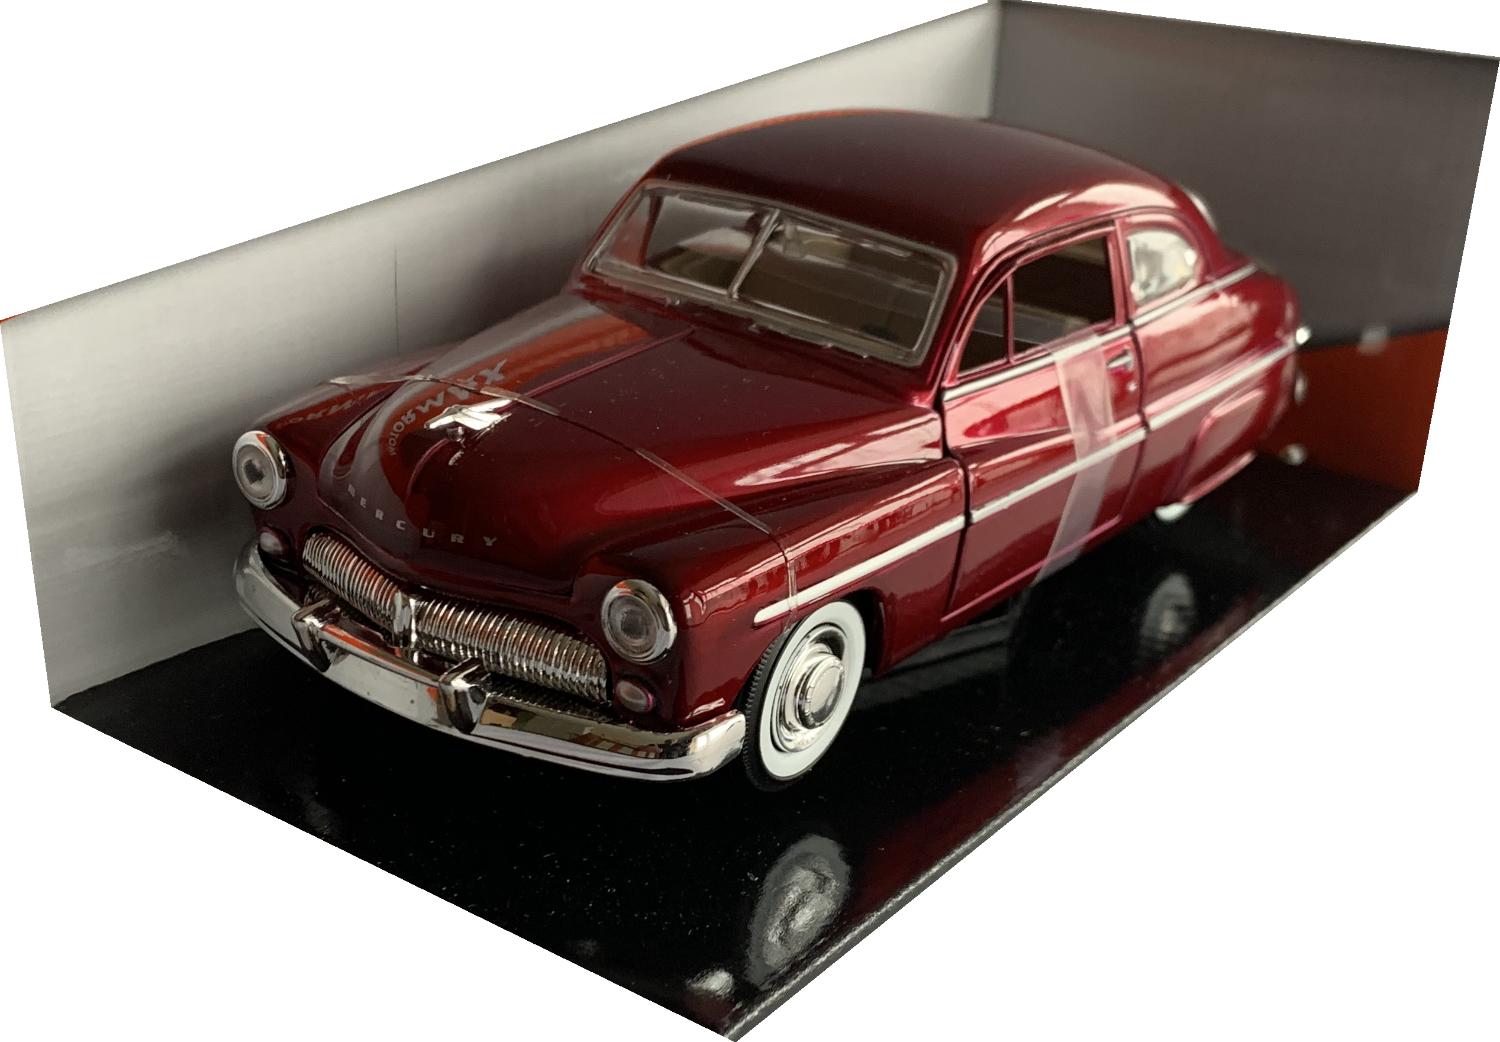 Mercury Coupe 1949 in metallic red 1:24 scale model from Motormax